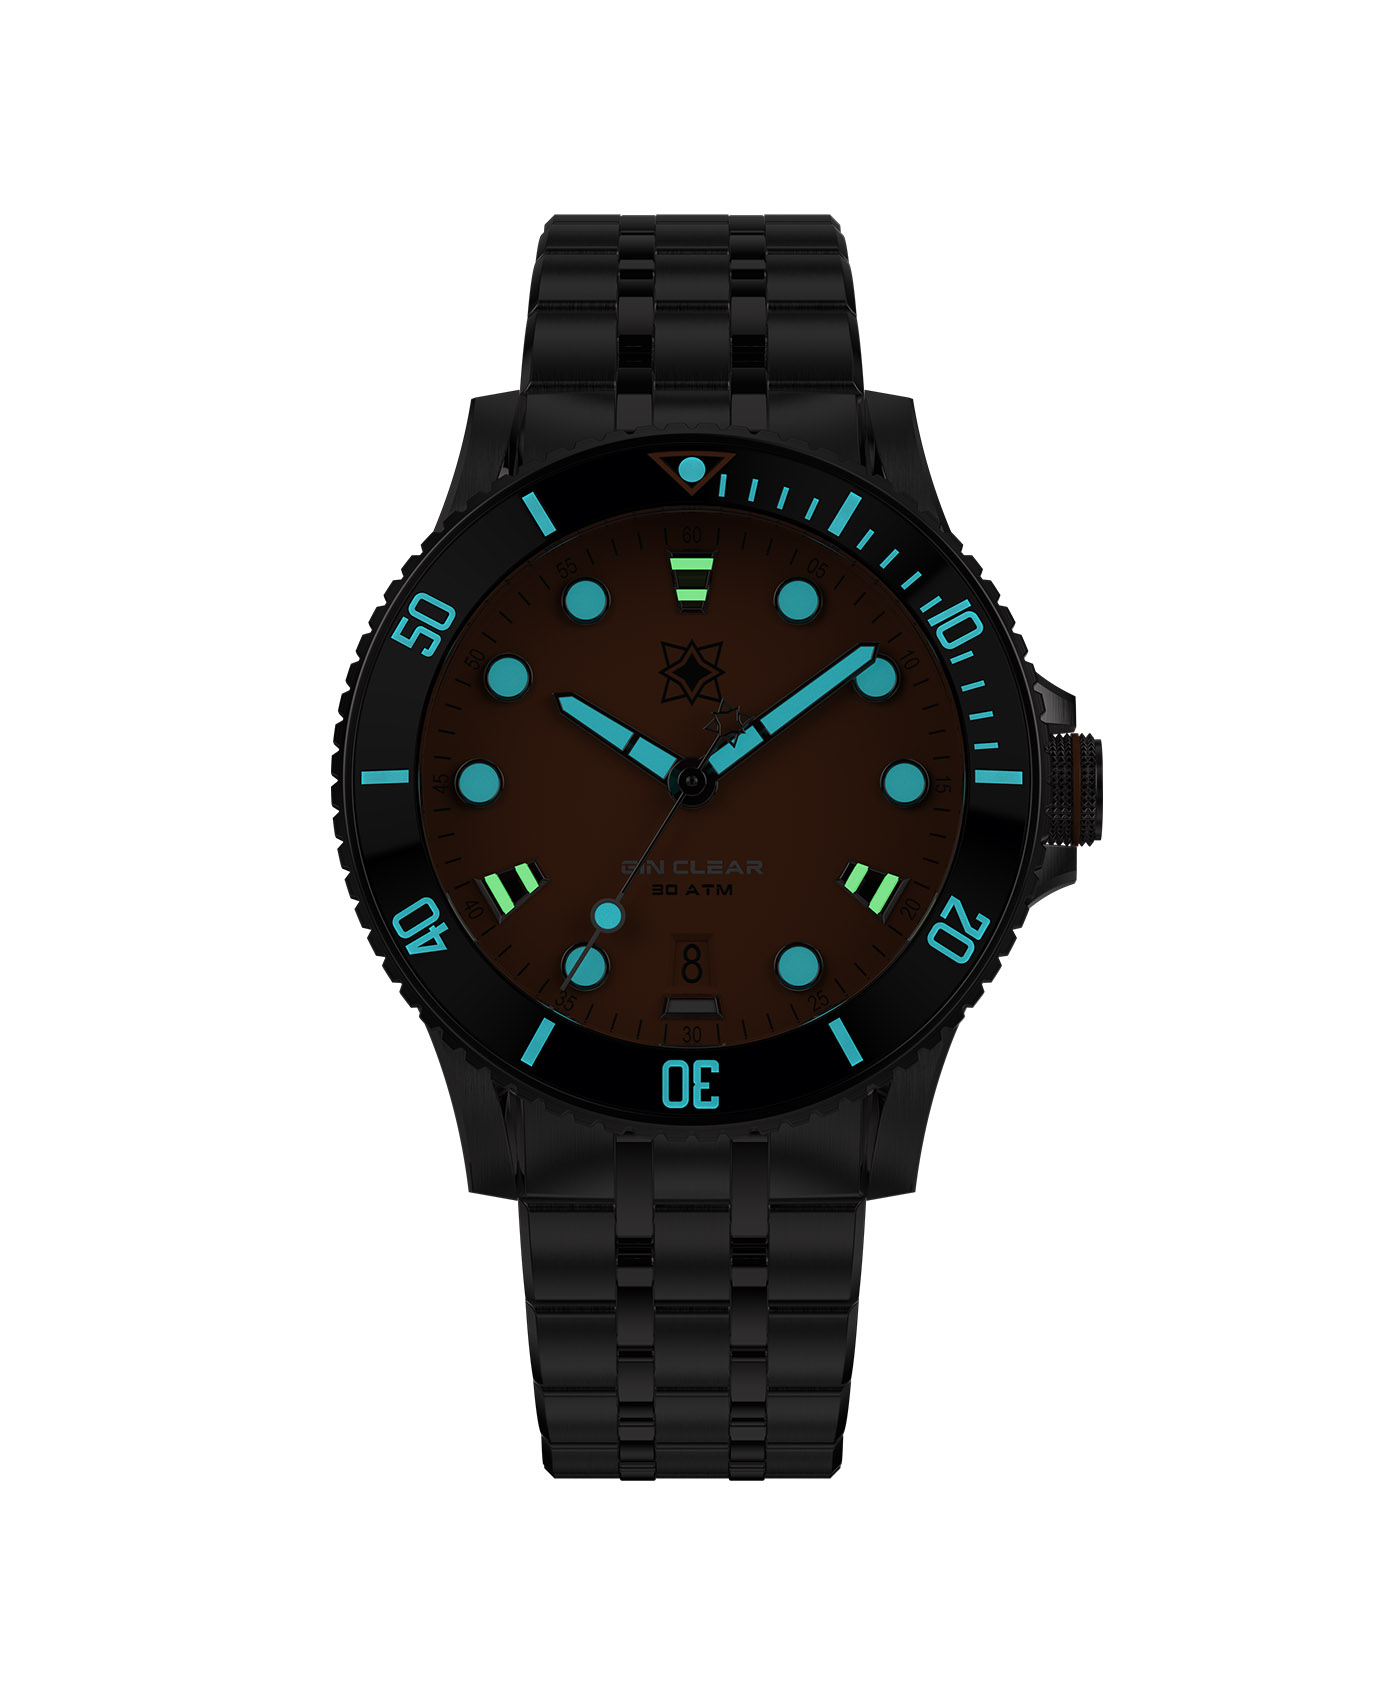 Second Hour - The Gin Clear MkII - Ocean Sunset-lume